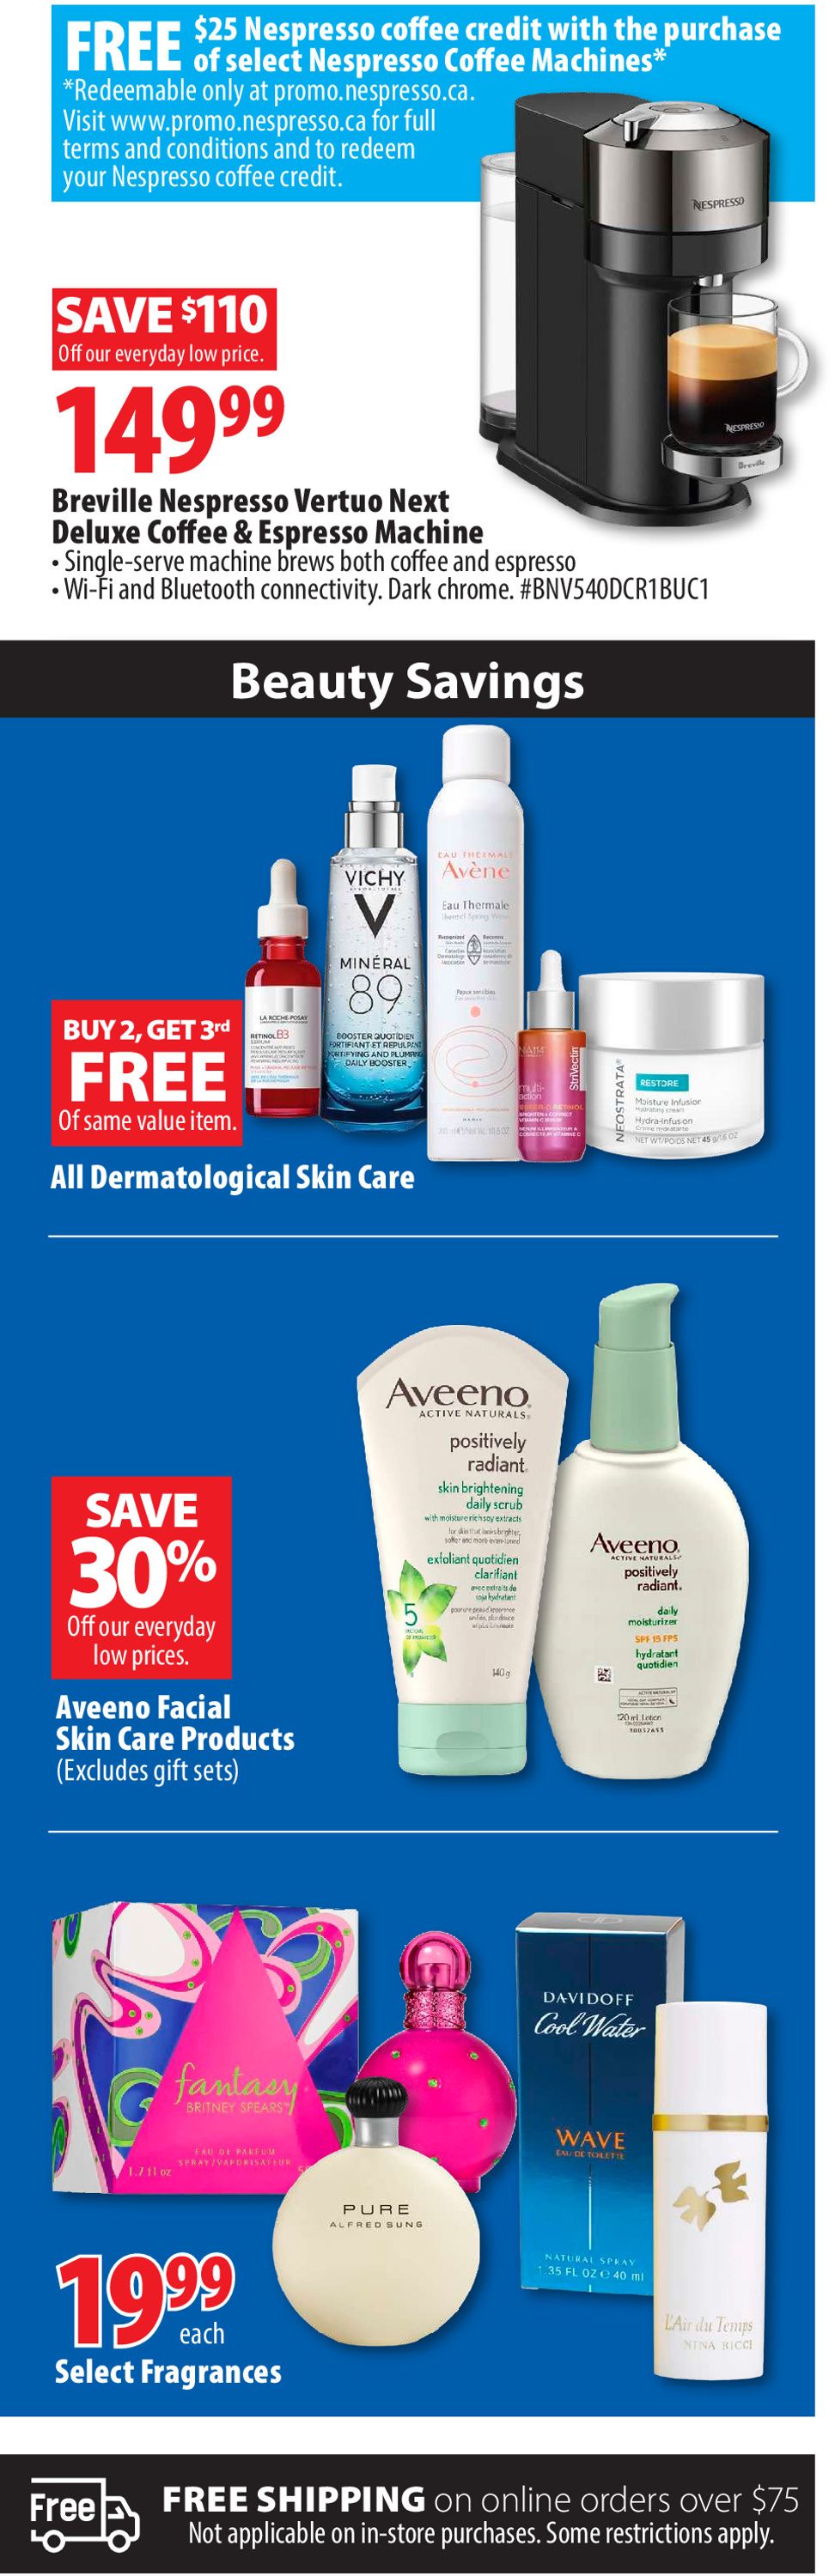 London Drugs Flyer from 11/25/2021